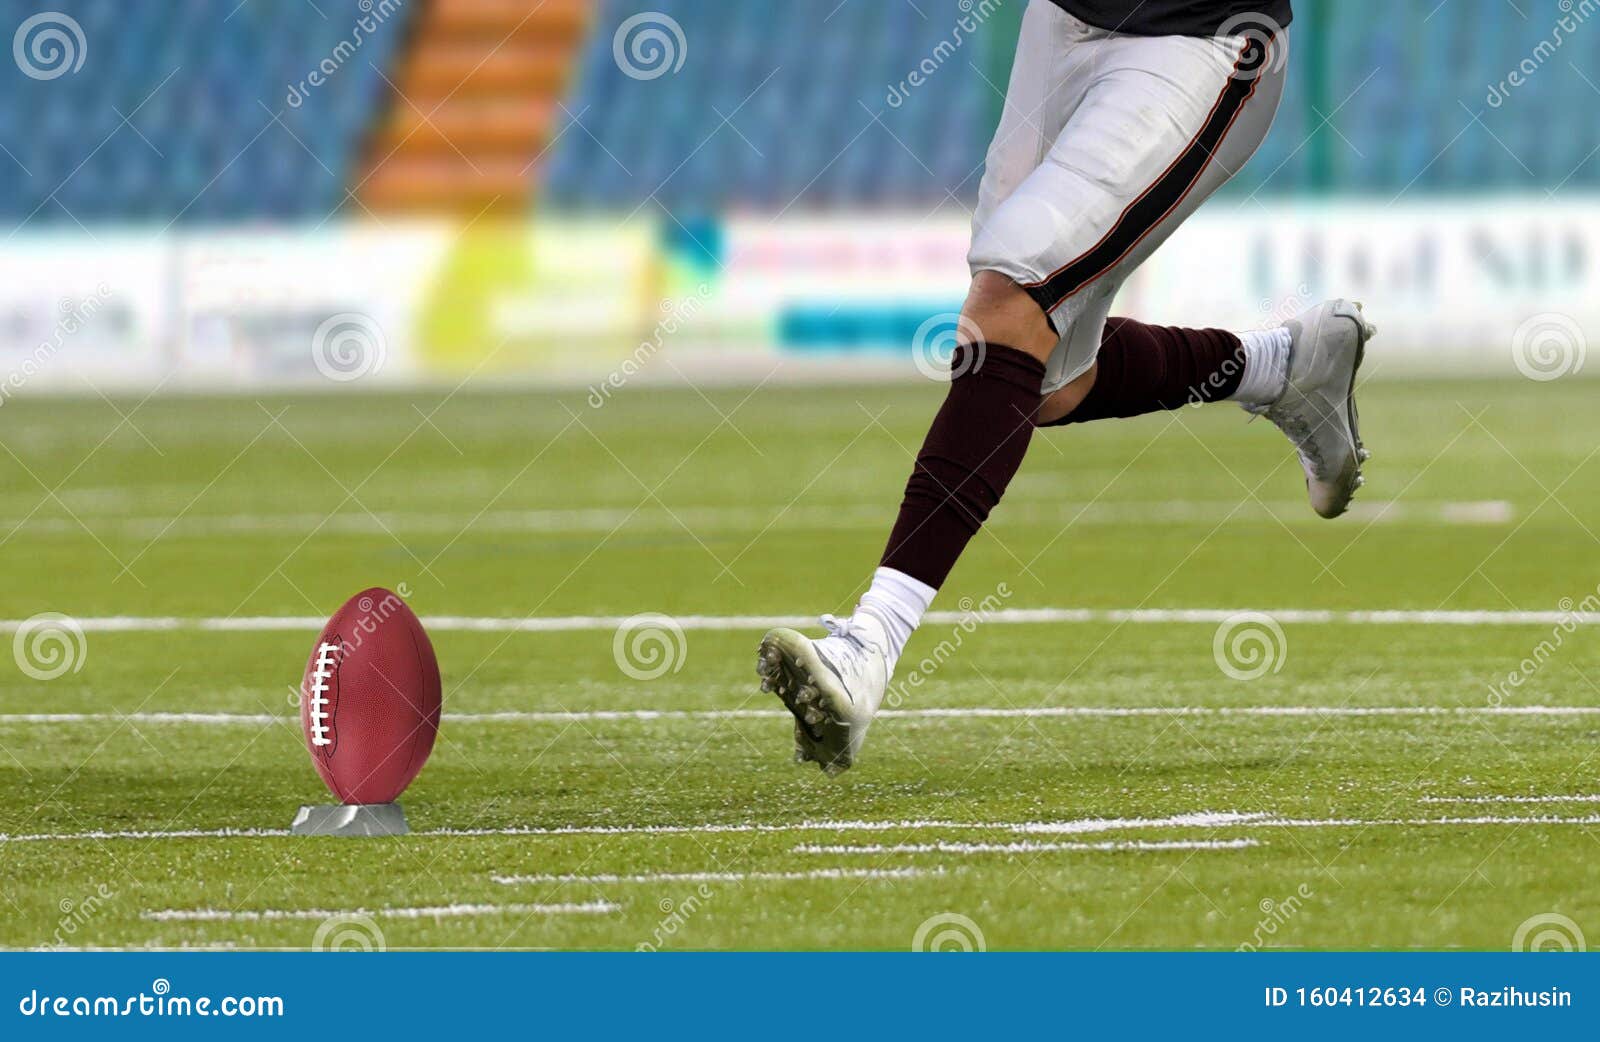 American Football Player Kickoff on Field Stock Photo - Image of field